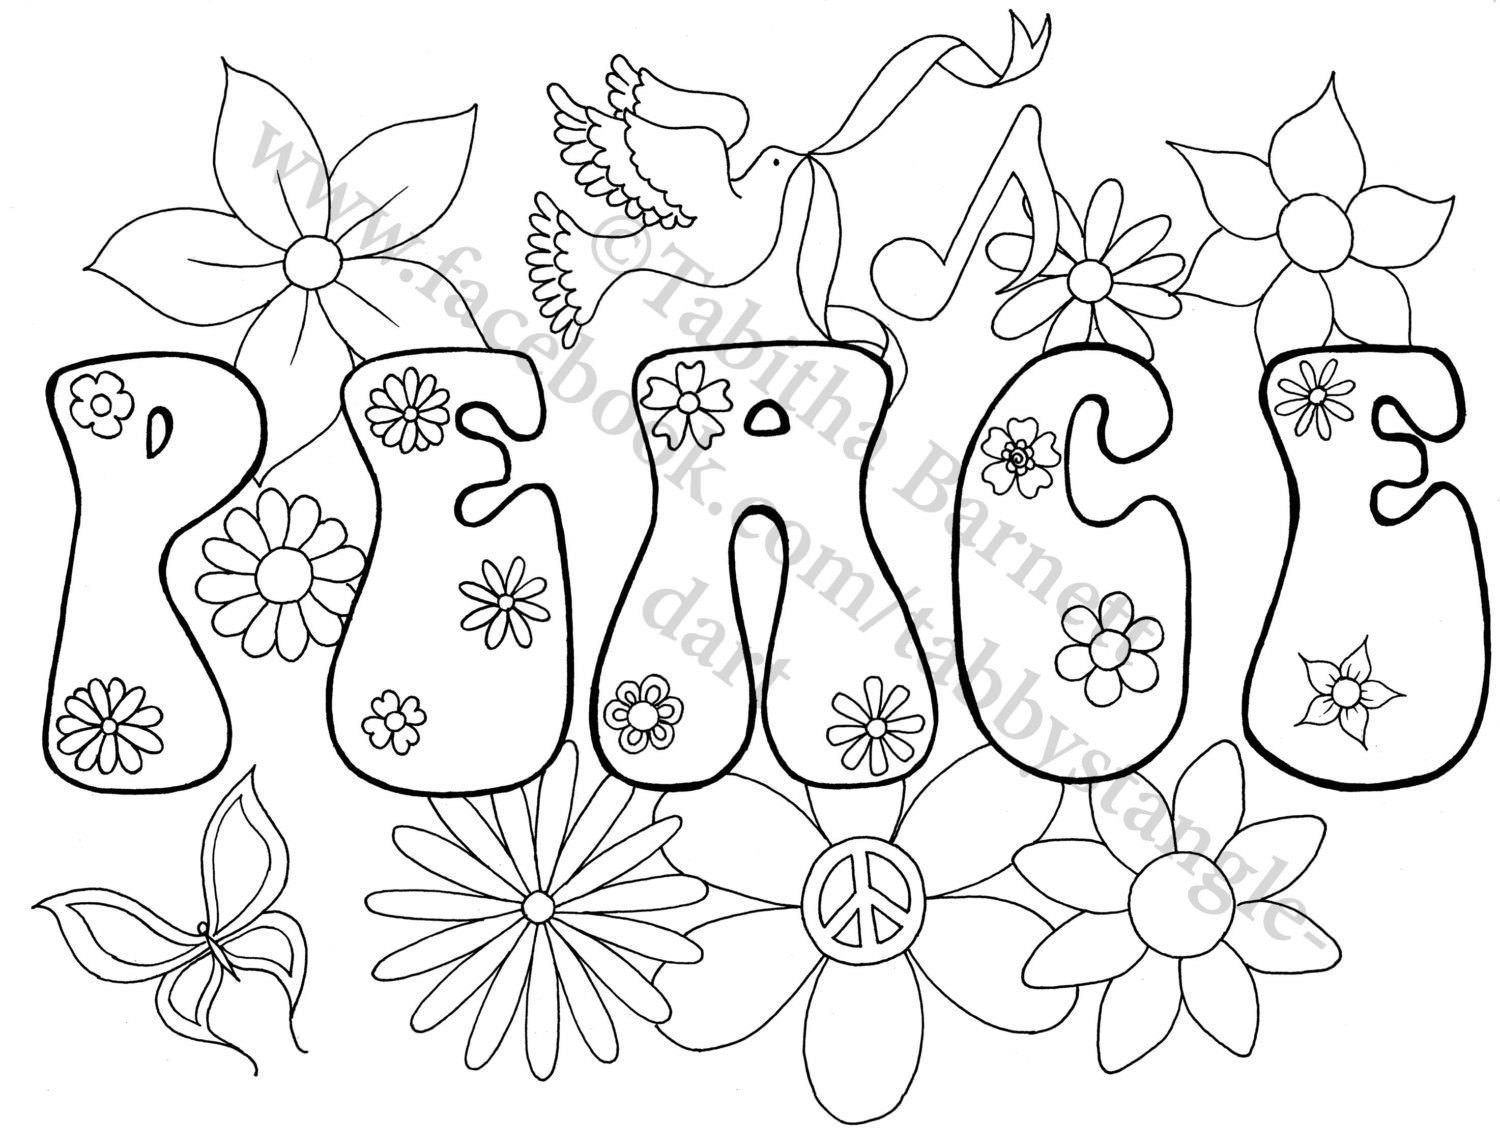 Inspired image of peace coloring pages